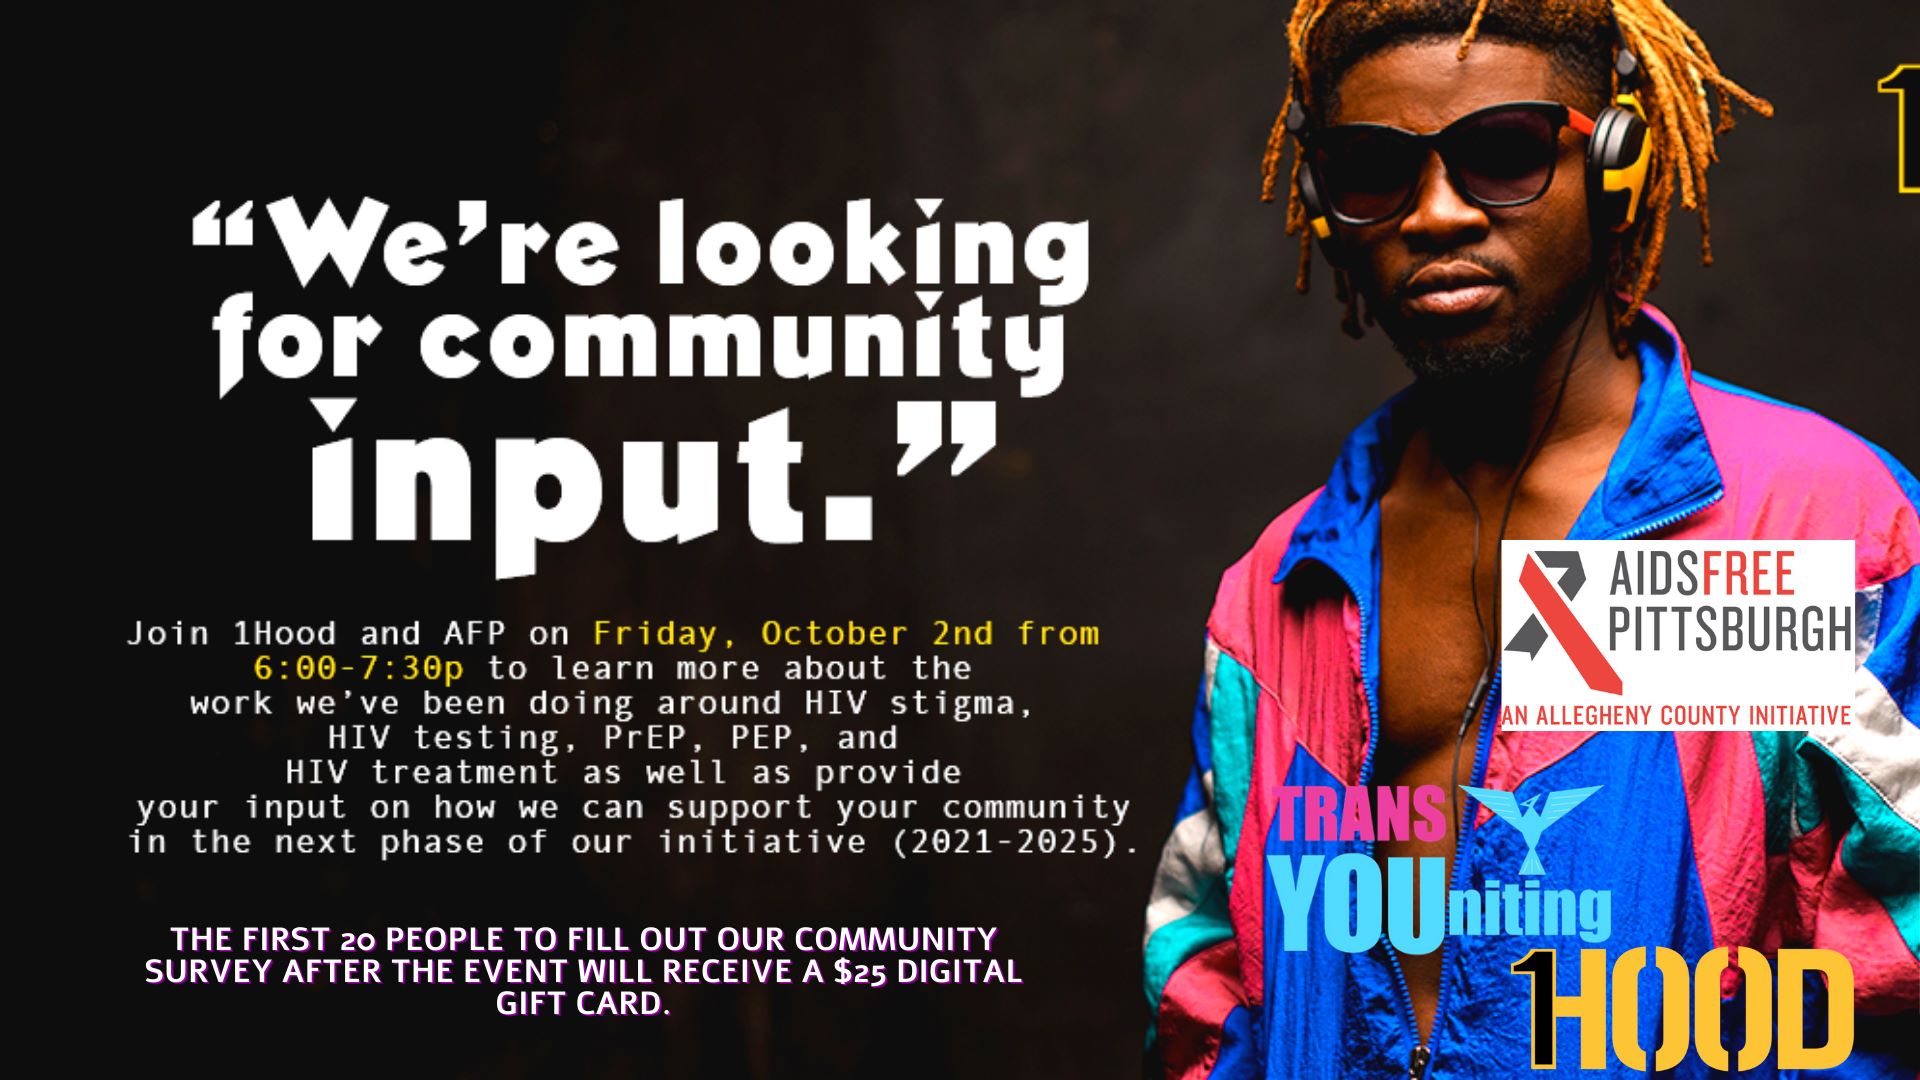 A Black man wearing sunglasses, headphones, and a pink, teal, and blue windbreaker stands in a photo, next to text that says We're looking for community input.